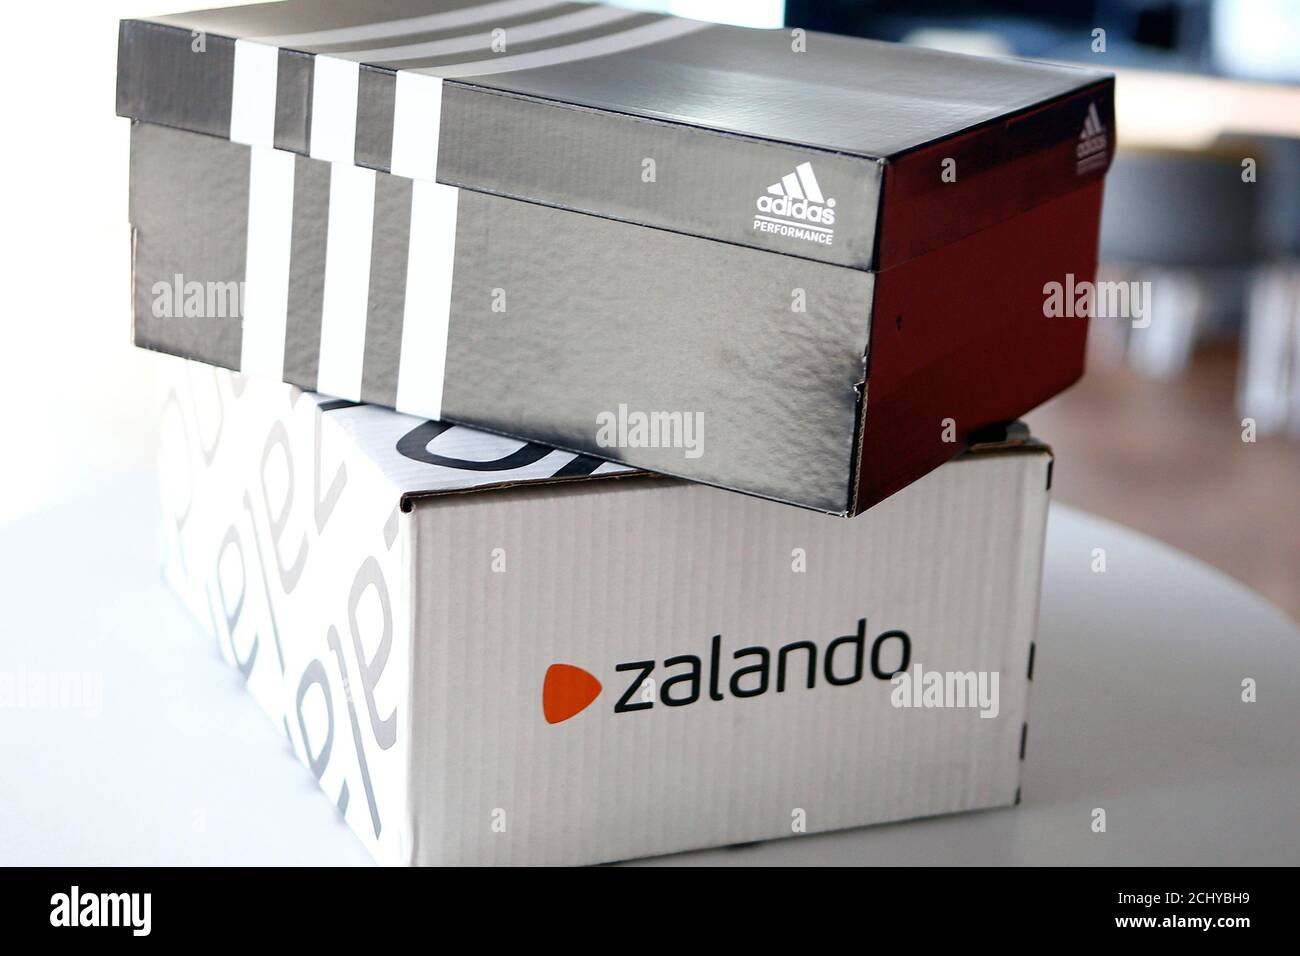 A Adidas shoebox stands above a Zalando cardboard box on a staged scene in  Berlin, Germany June 8, 2016. REUTERS/Axel Schmidt Stock Photo - Alamy